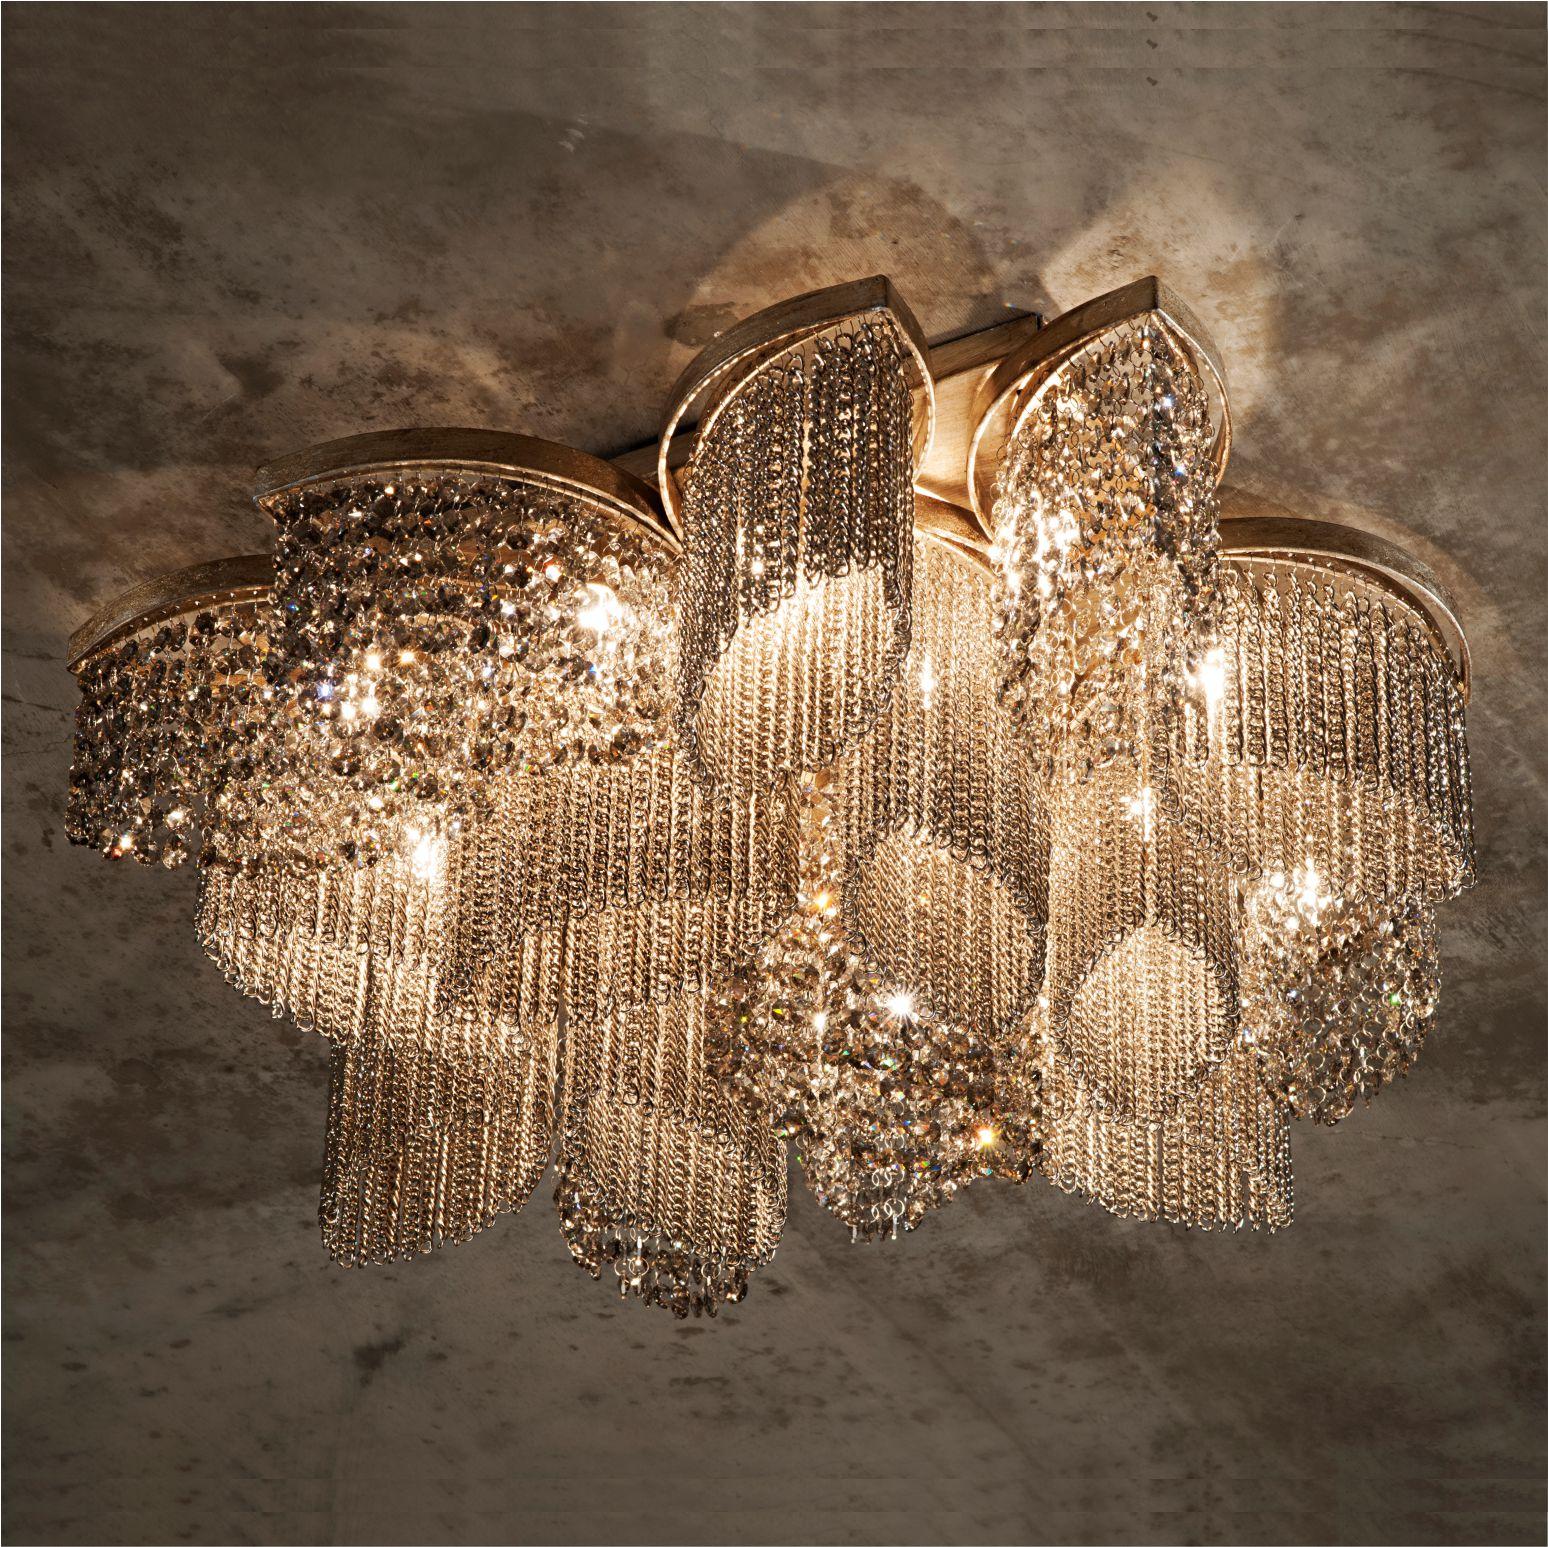 Crystal chandelier lamp by Aver
Dimensions: D 70 x W 70 x H 25 cm 
Materials: Nickel, Gold, Aged Gold. Clear, Satin, Golden. Crystal Rocks. 
Lighting: 16 x G9
Available in finishes: Silver Plated, Aged Silver Plated, Gold Plated, Aged Gold Plated.